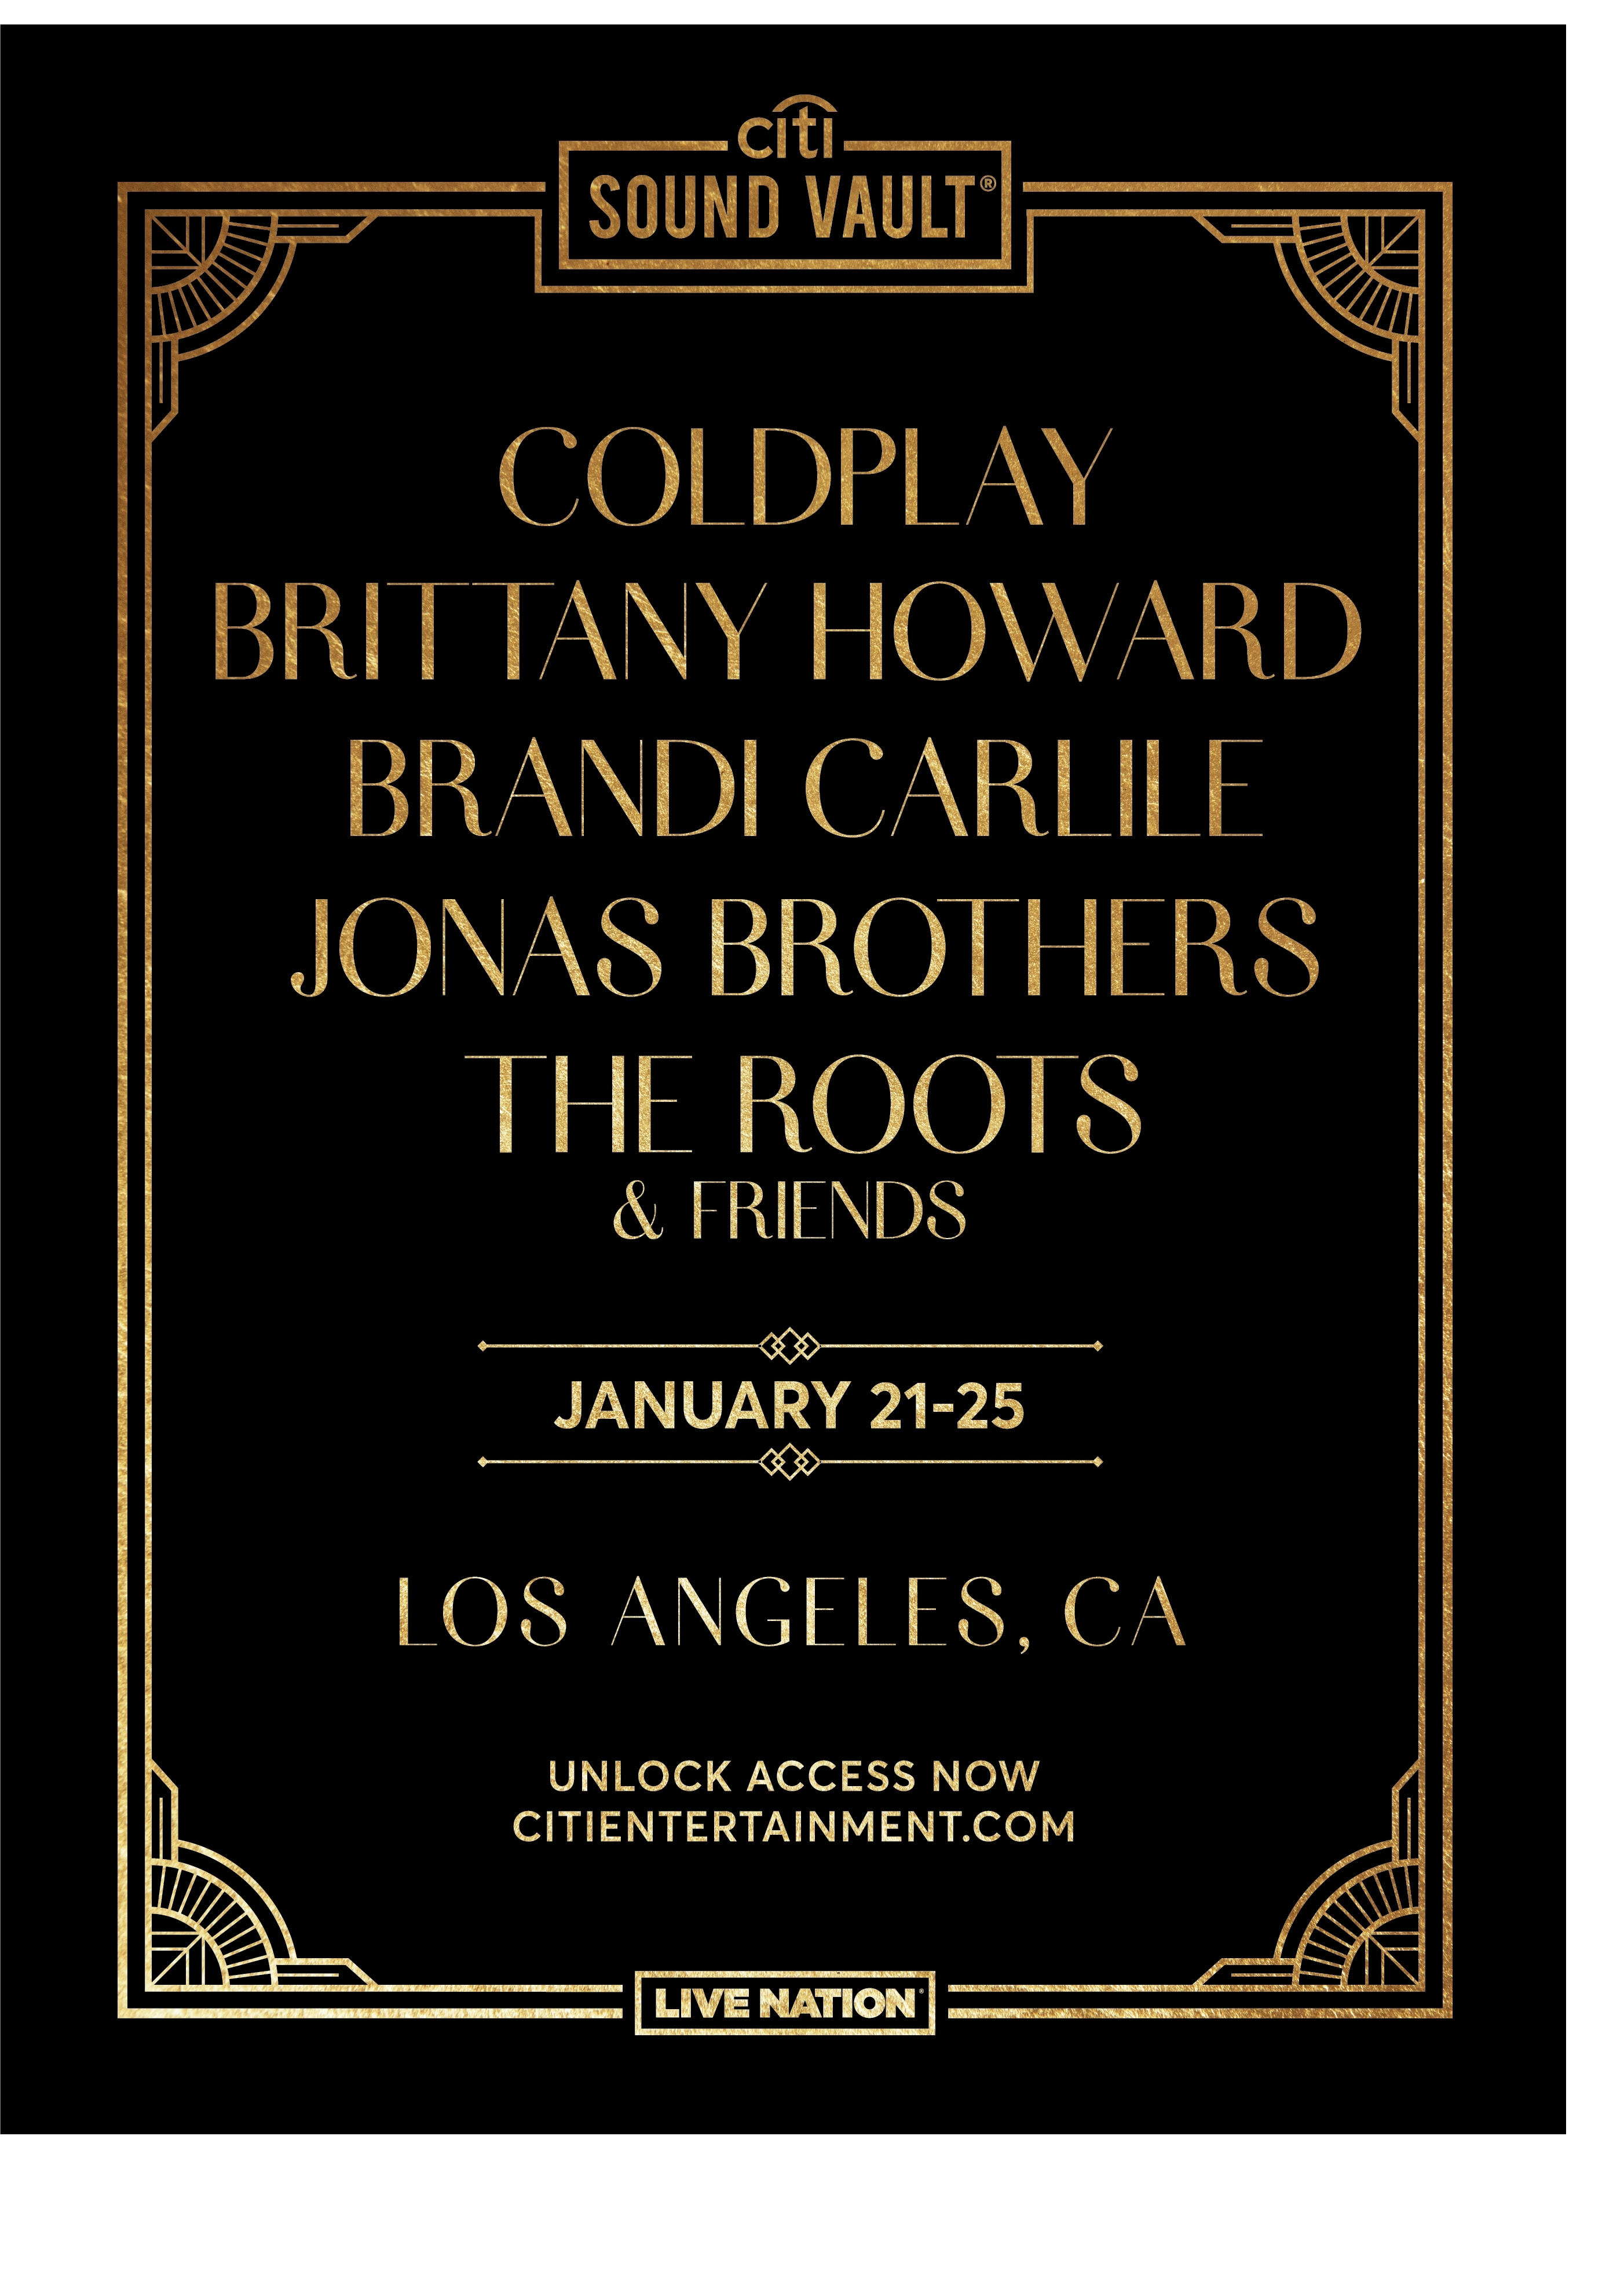 Nieuw Coldplay, Brittany Howard, Brandi Carlile and the Jonas Brothers IT-44